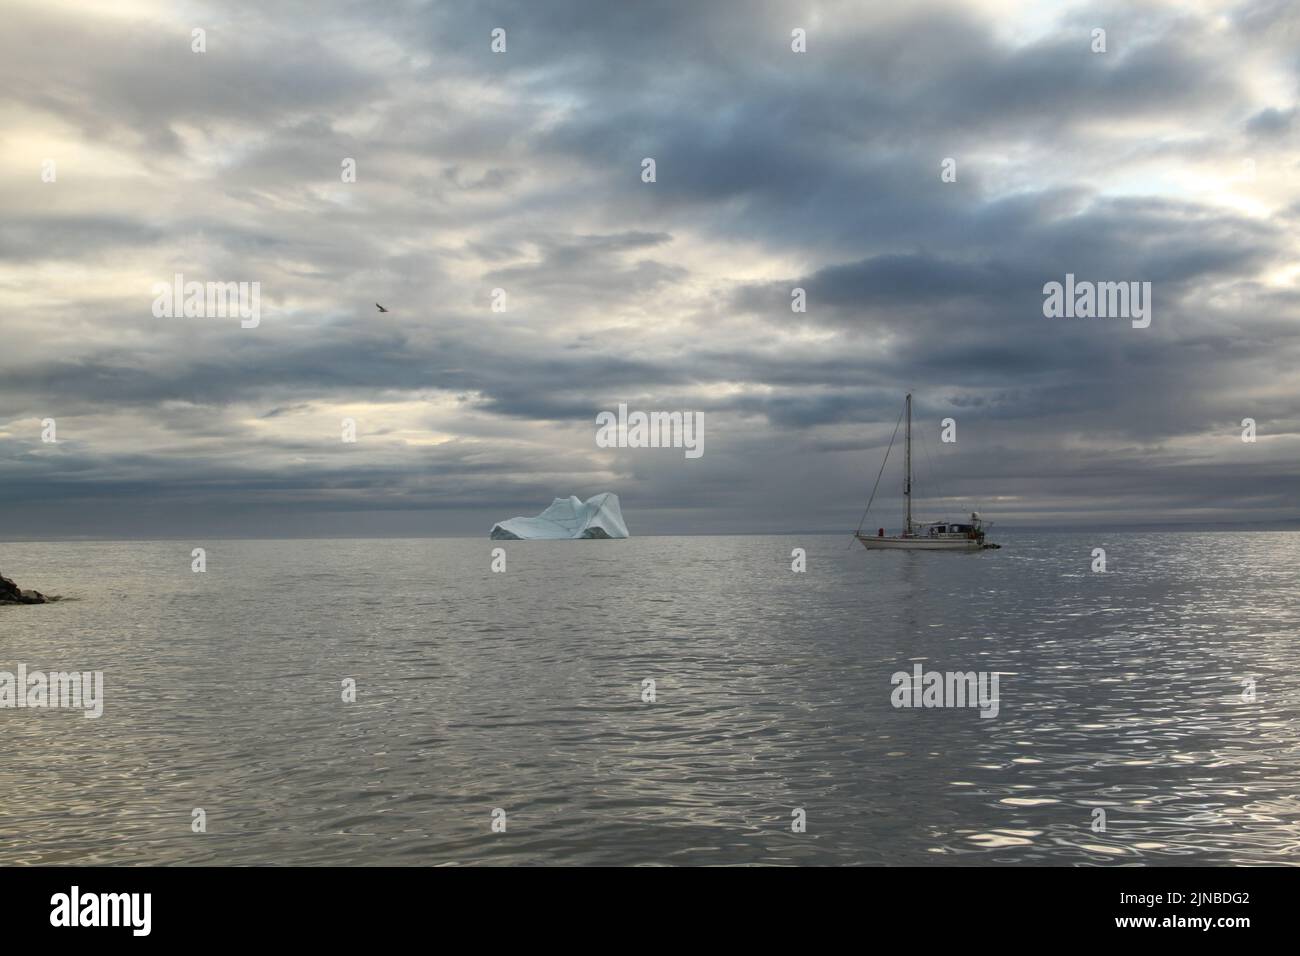 A sailboat anchored near Pond Inlet, Nunavut waiting for weather to transit through the Northwest Passage, Canada Stock Photo